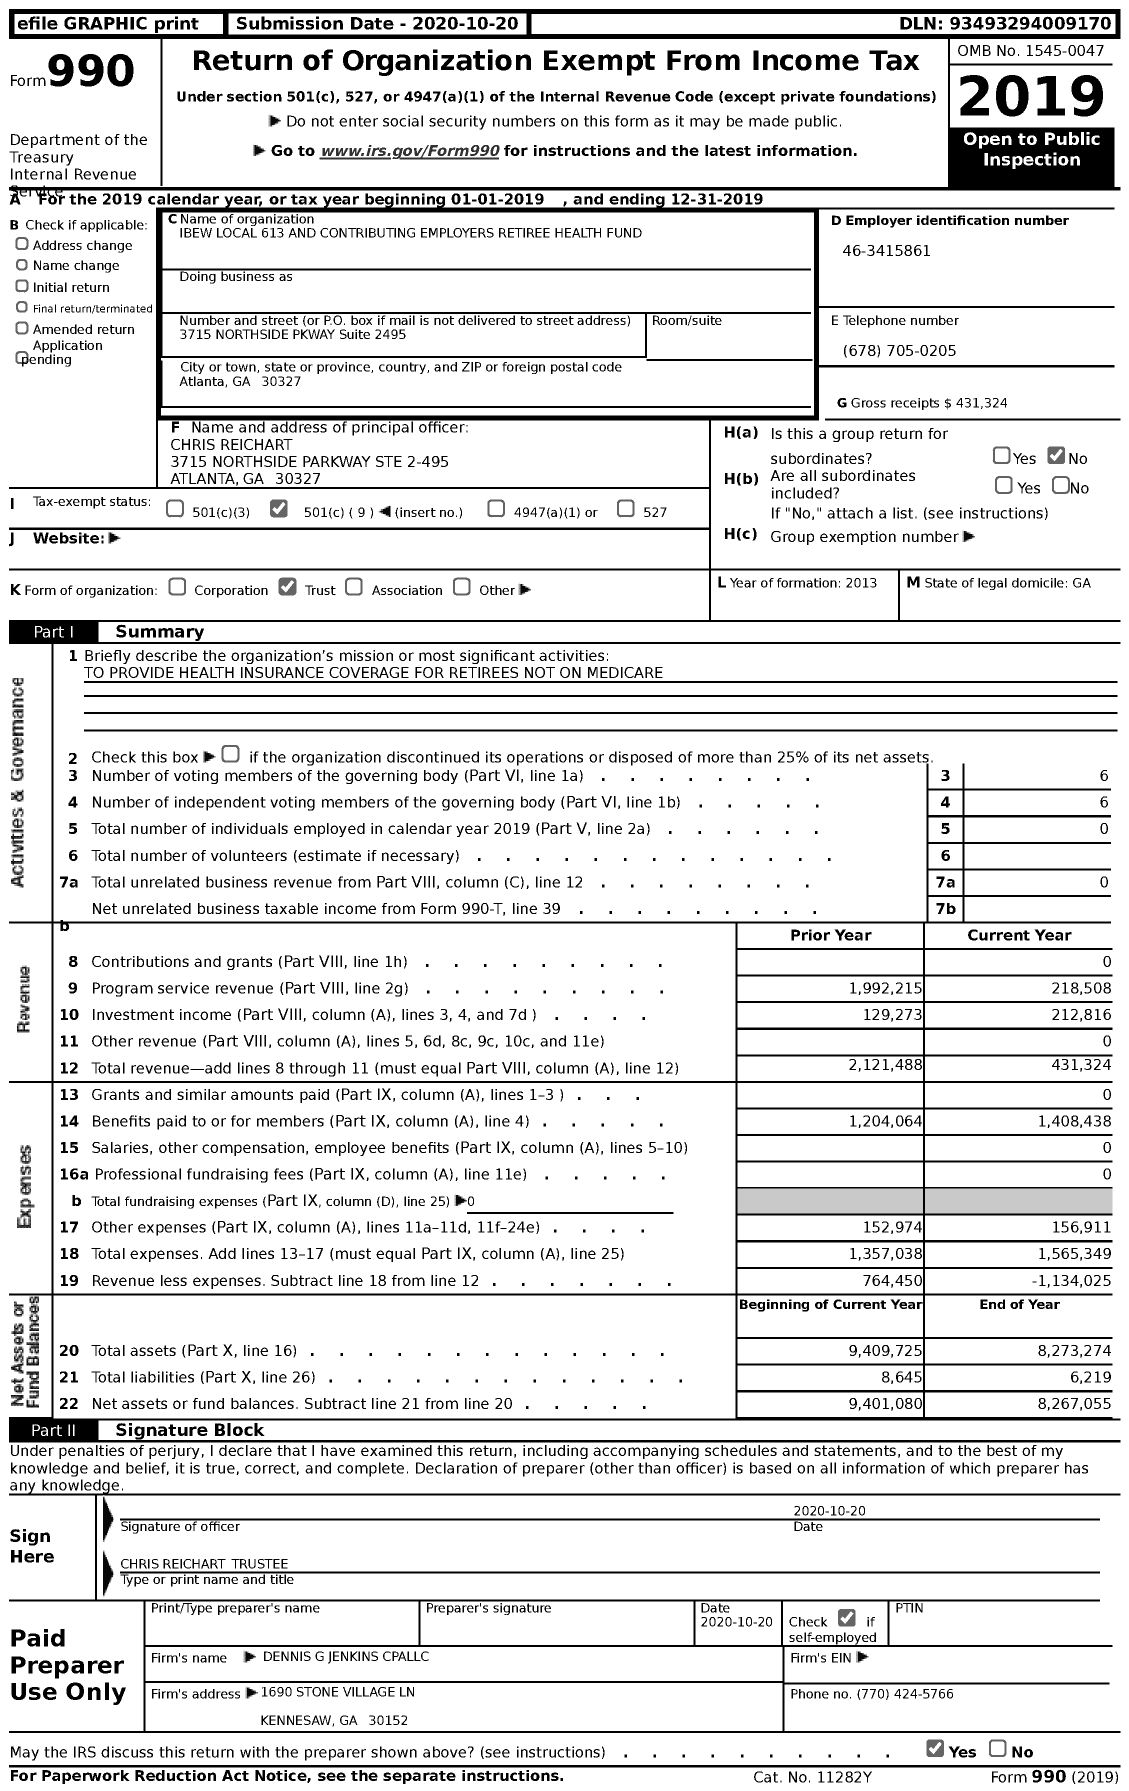 Image of first page of 2019 Form 990 for IBEW Local 613 and Contributing Employers Retiree Health Fund